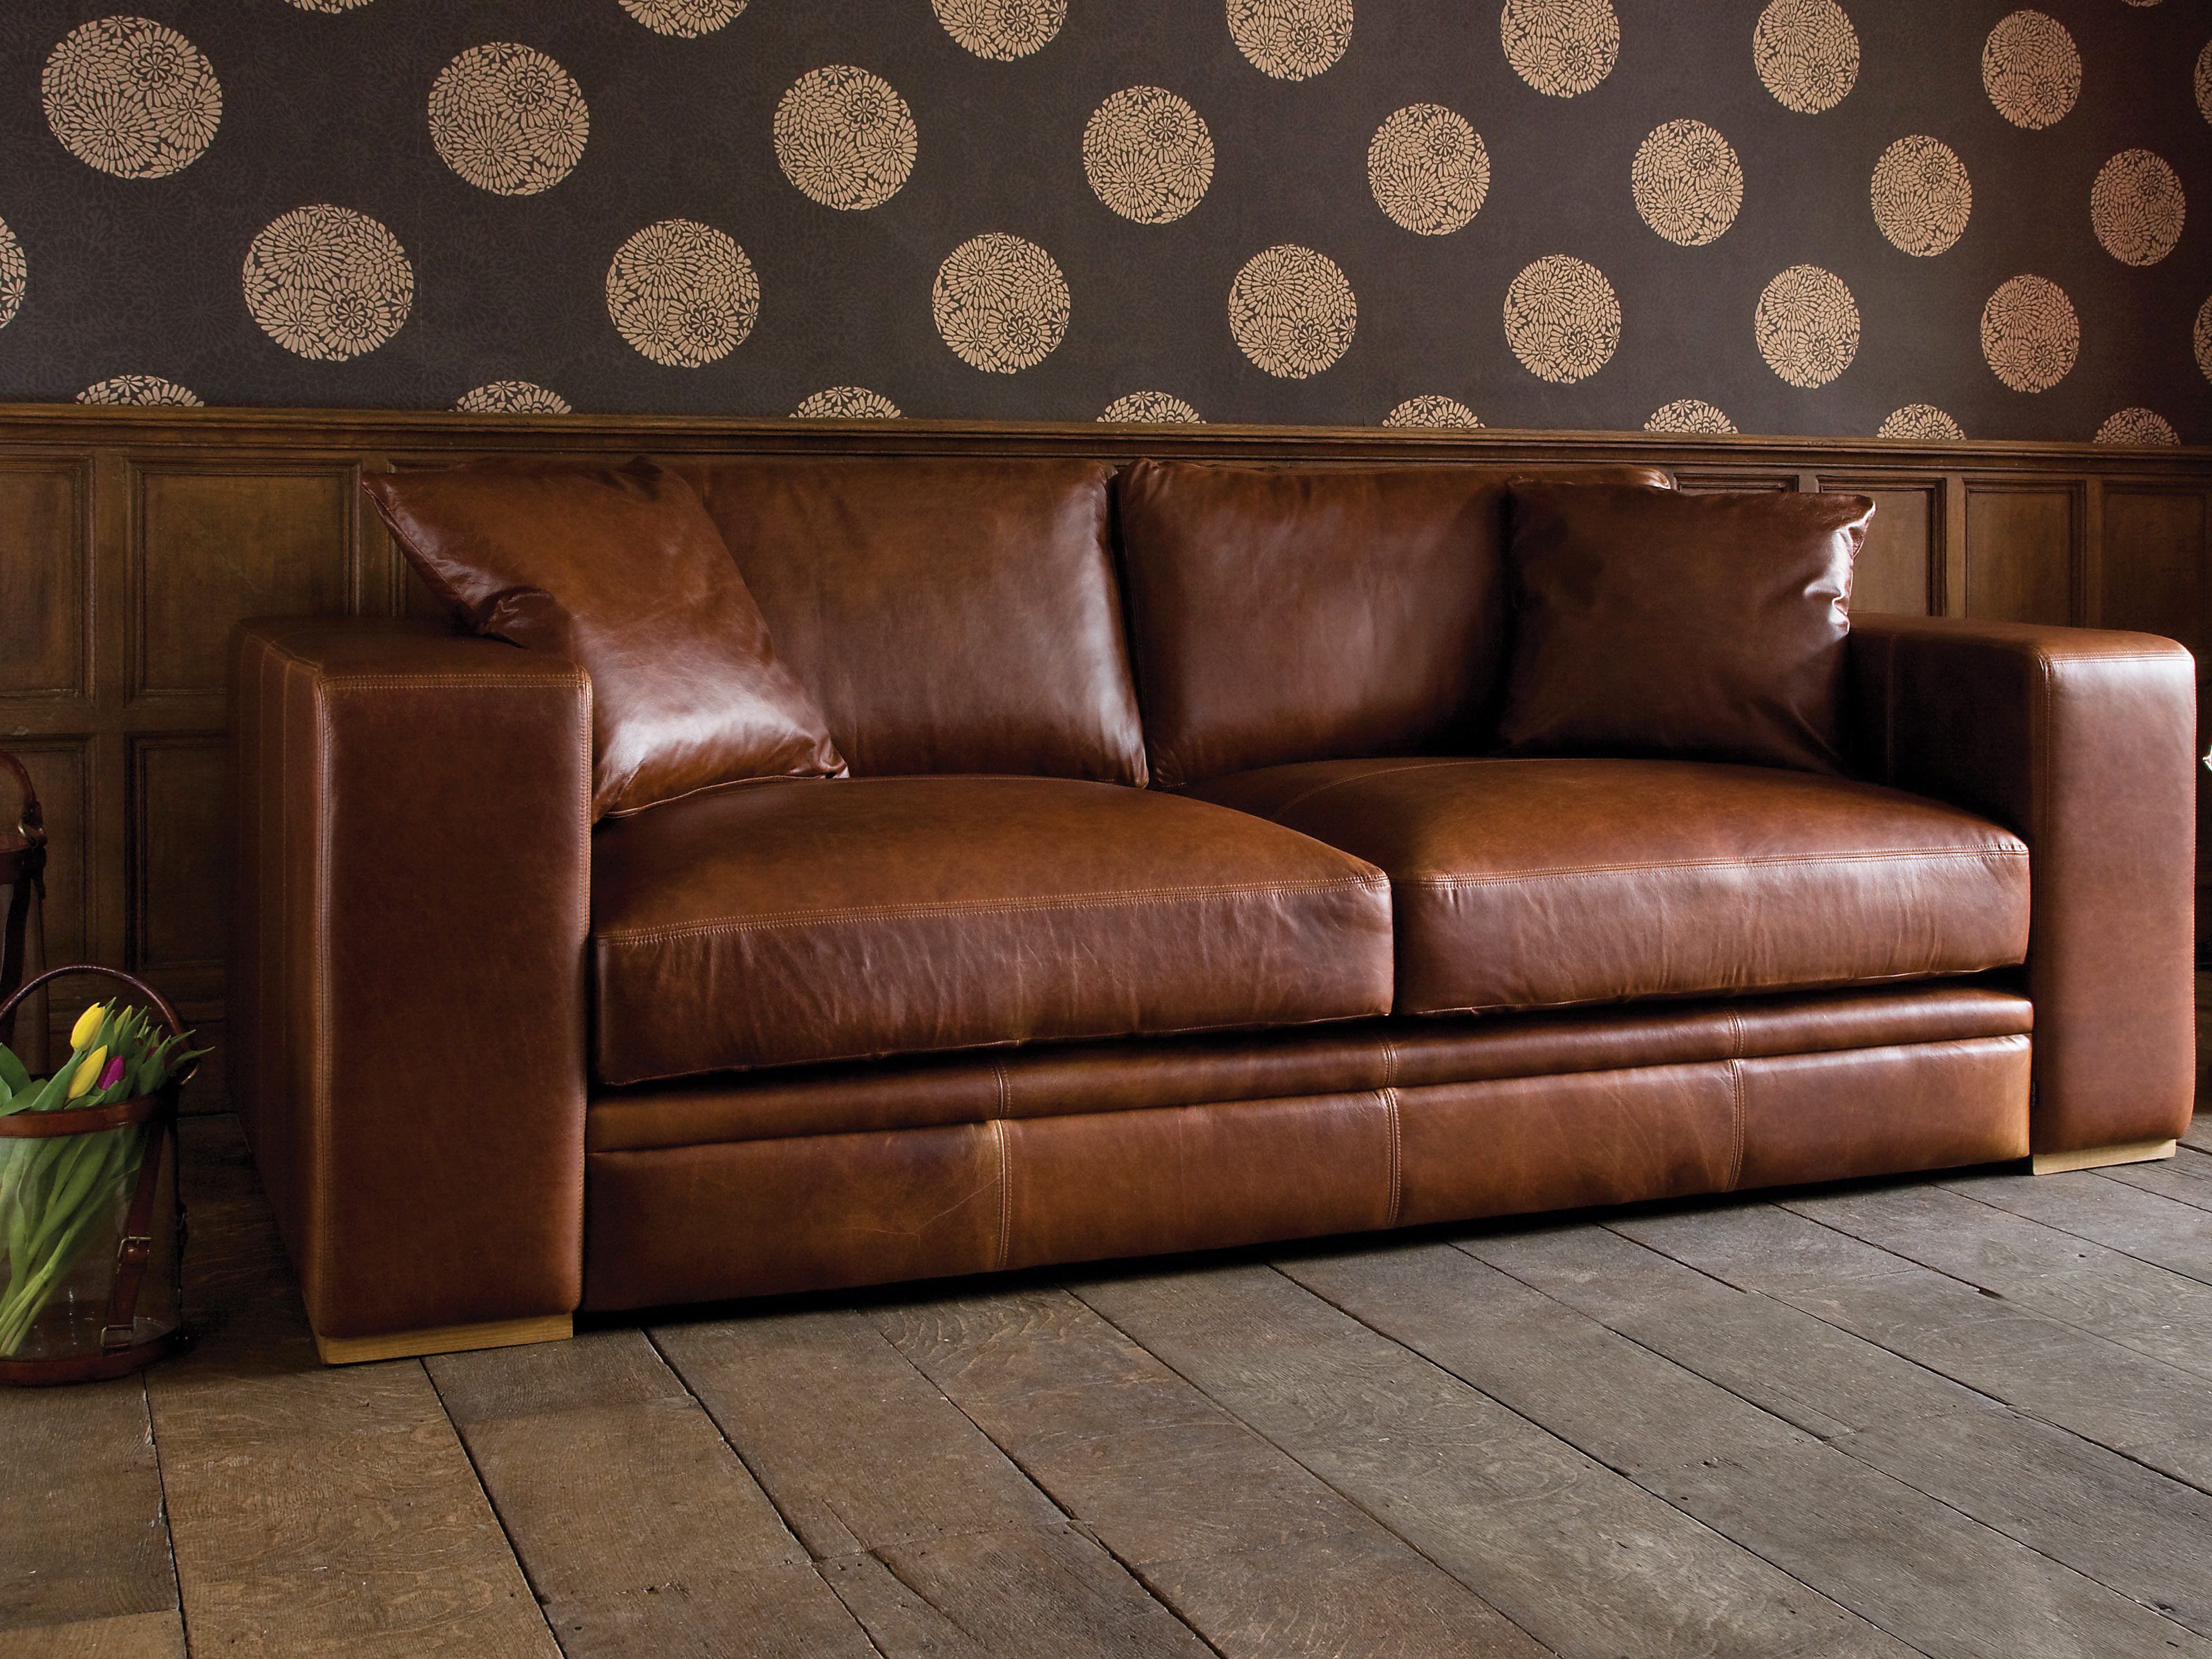 Brown Leather Couch Wide Wallpaper 20229 3200x2400